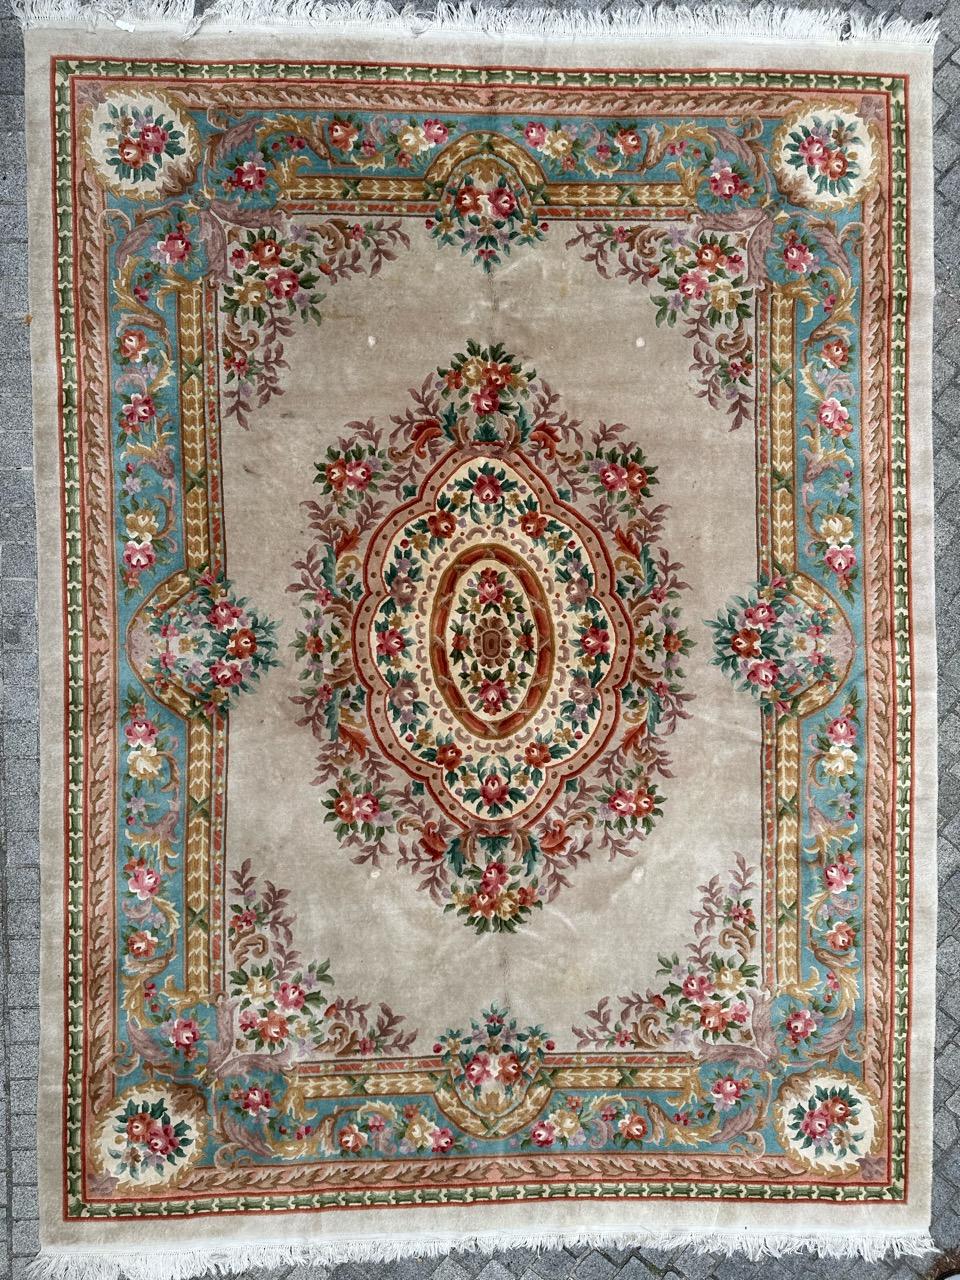 Exquisite Large Chinese Rug with Stunning French Savonnerie and Aubusson Style Floral Design

Discover the elegance of this magnificent Chinese rug! This pretty, generously sized piece boasts a beautiful floral design inspired by the renowned French